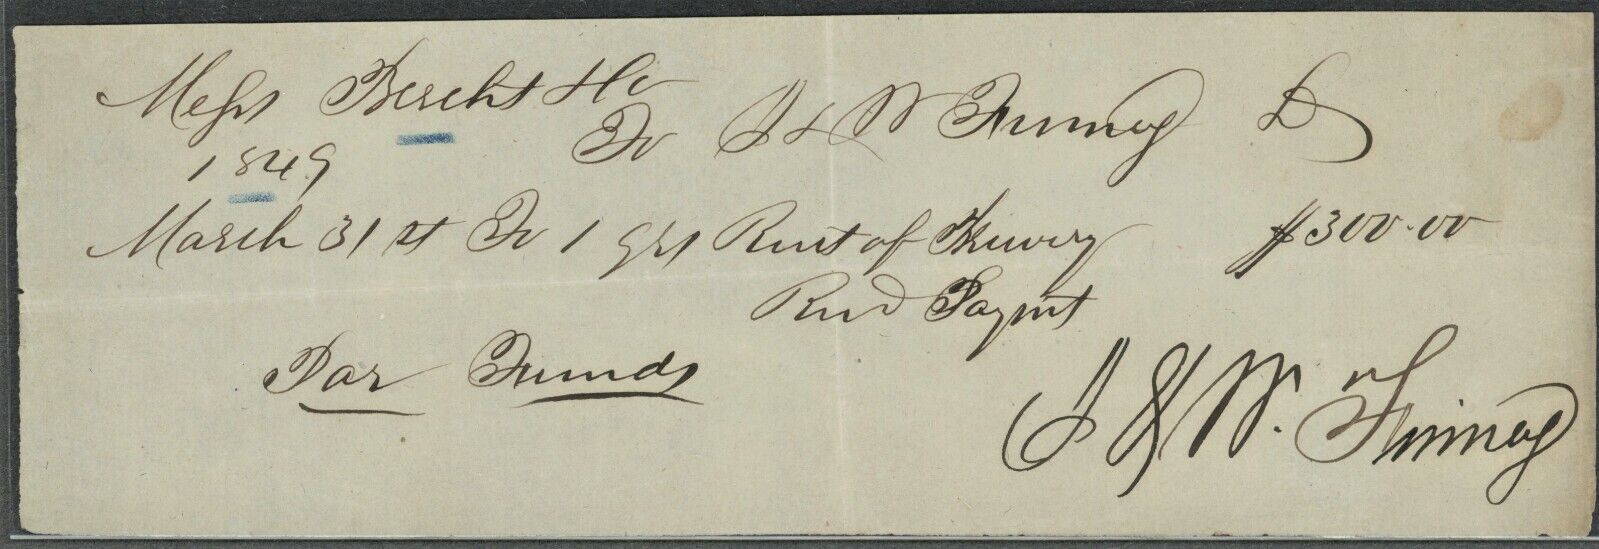 MYSTERY FINNEY (??) Autograph Document Signed - 1849